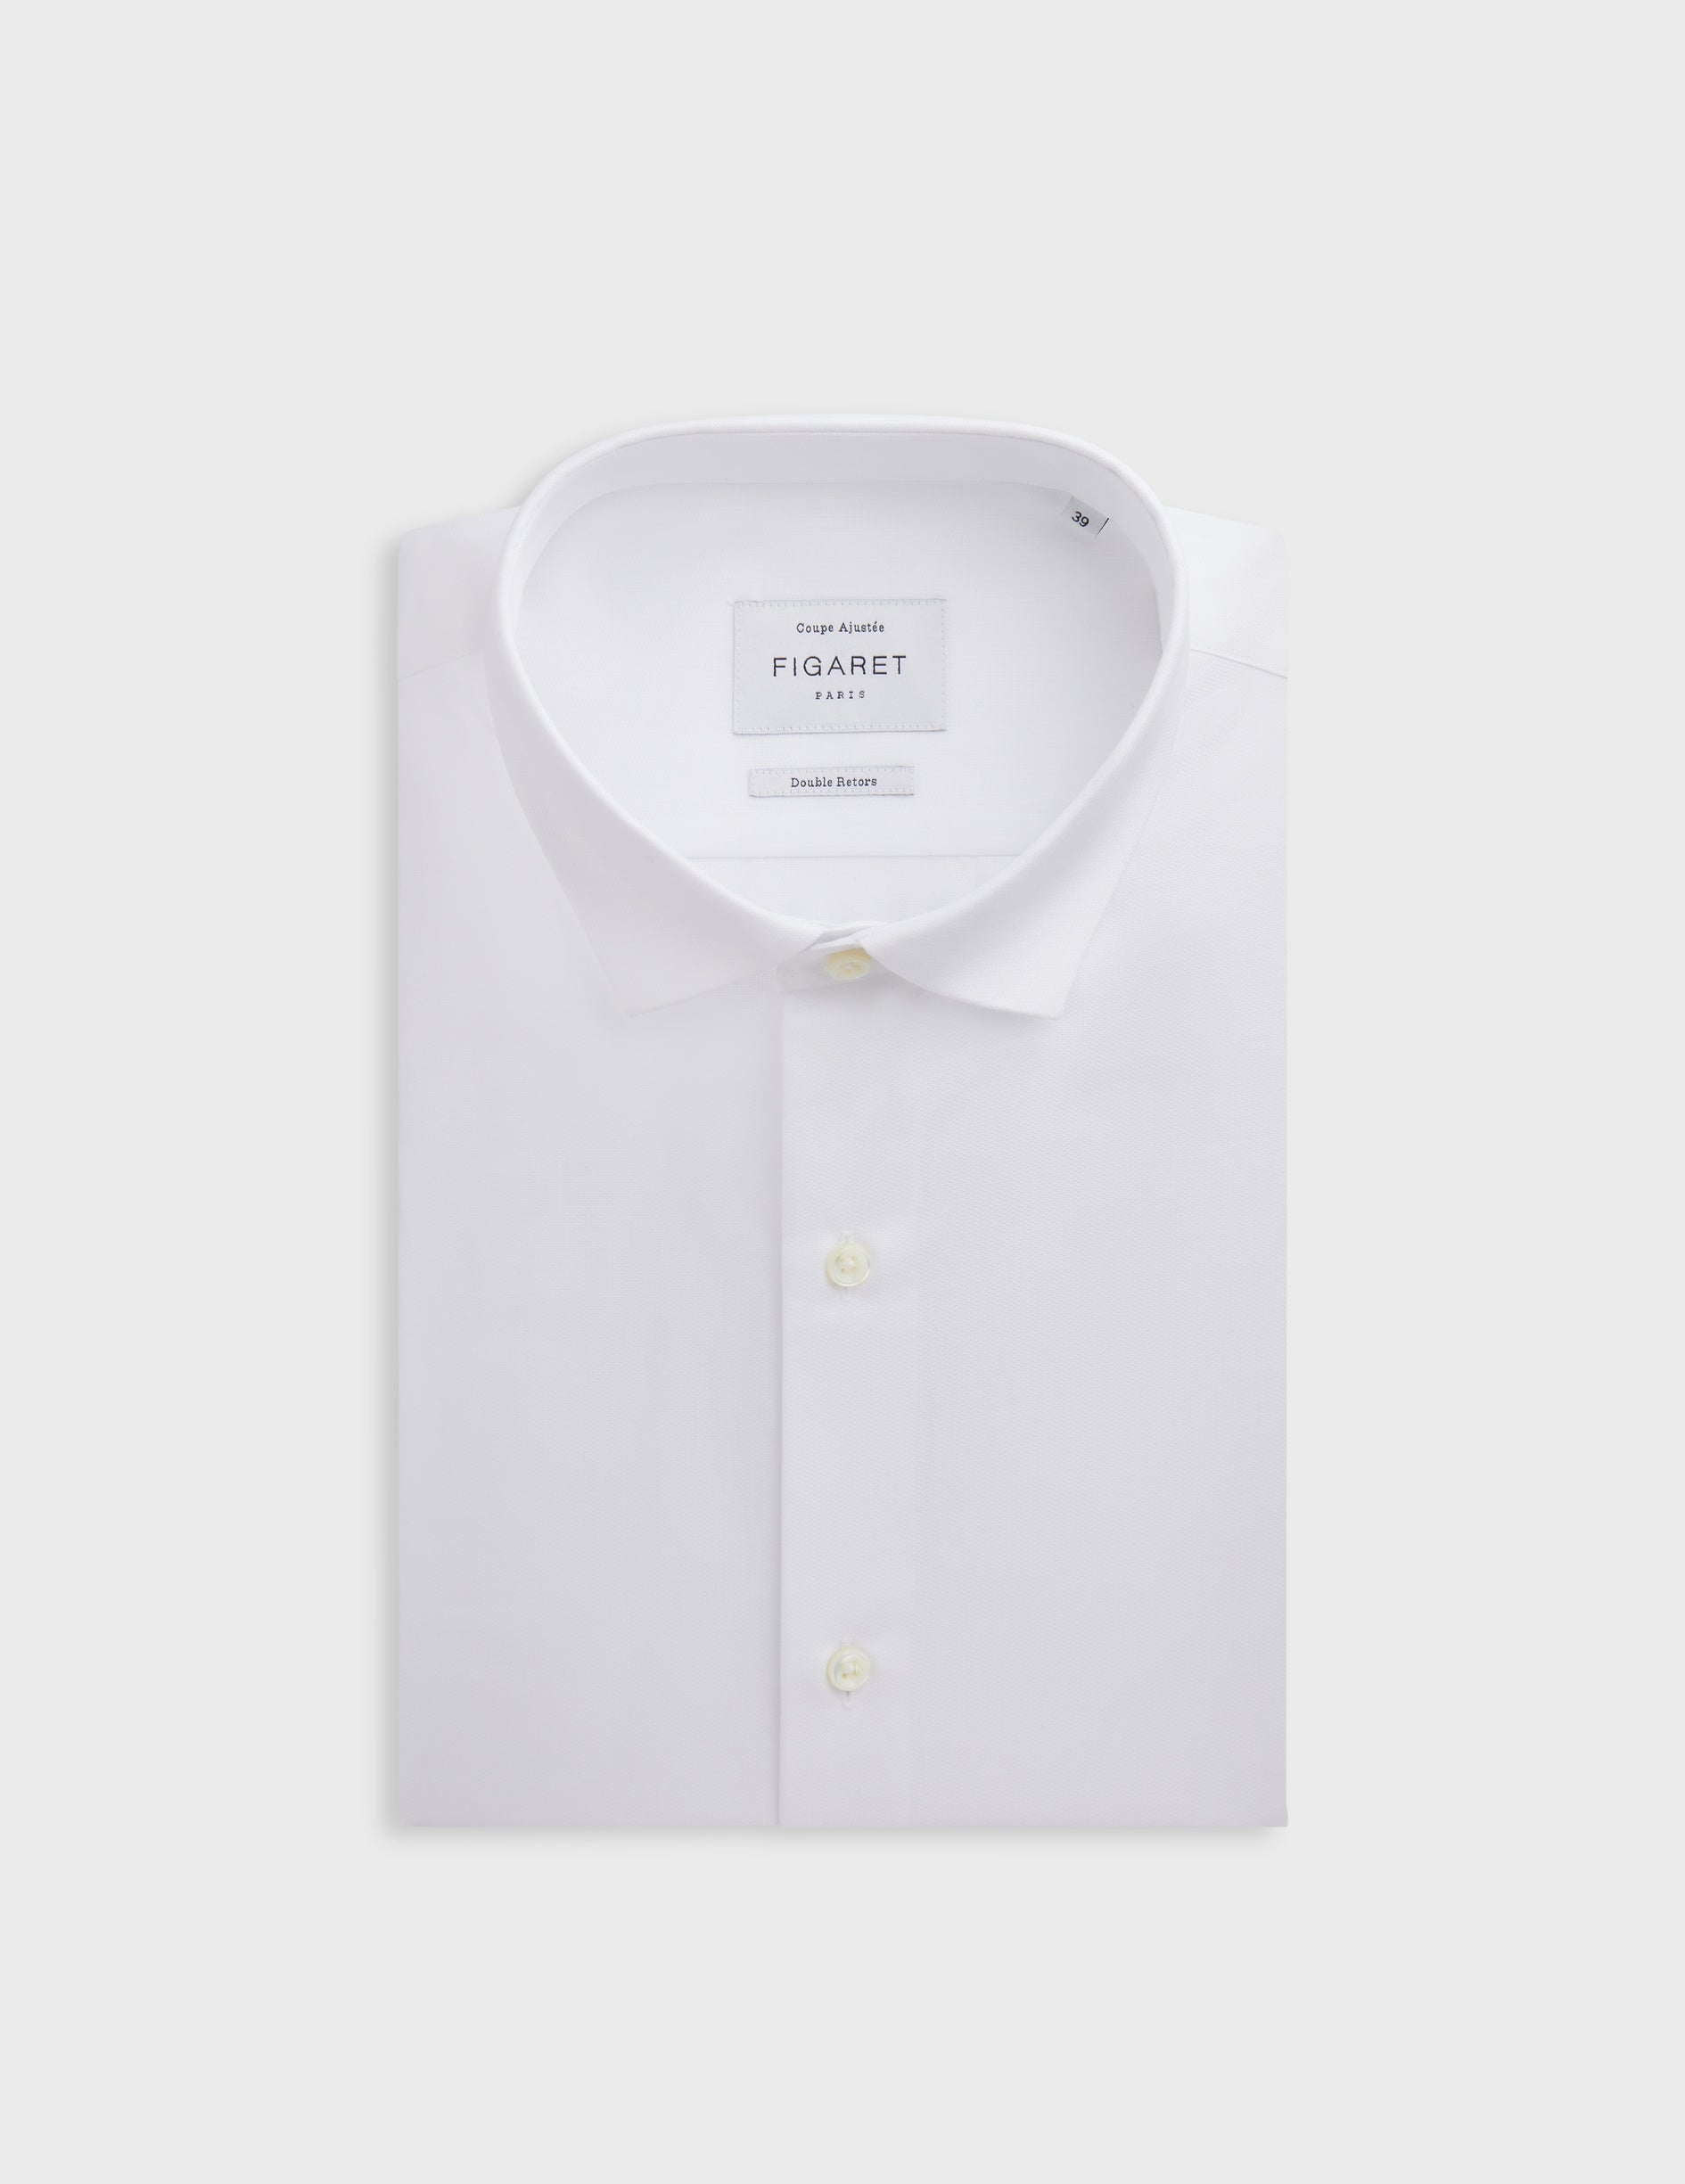 Fitted white shirt - Shaped - Thin Collar